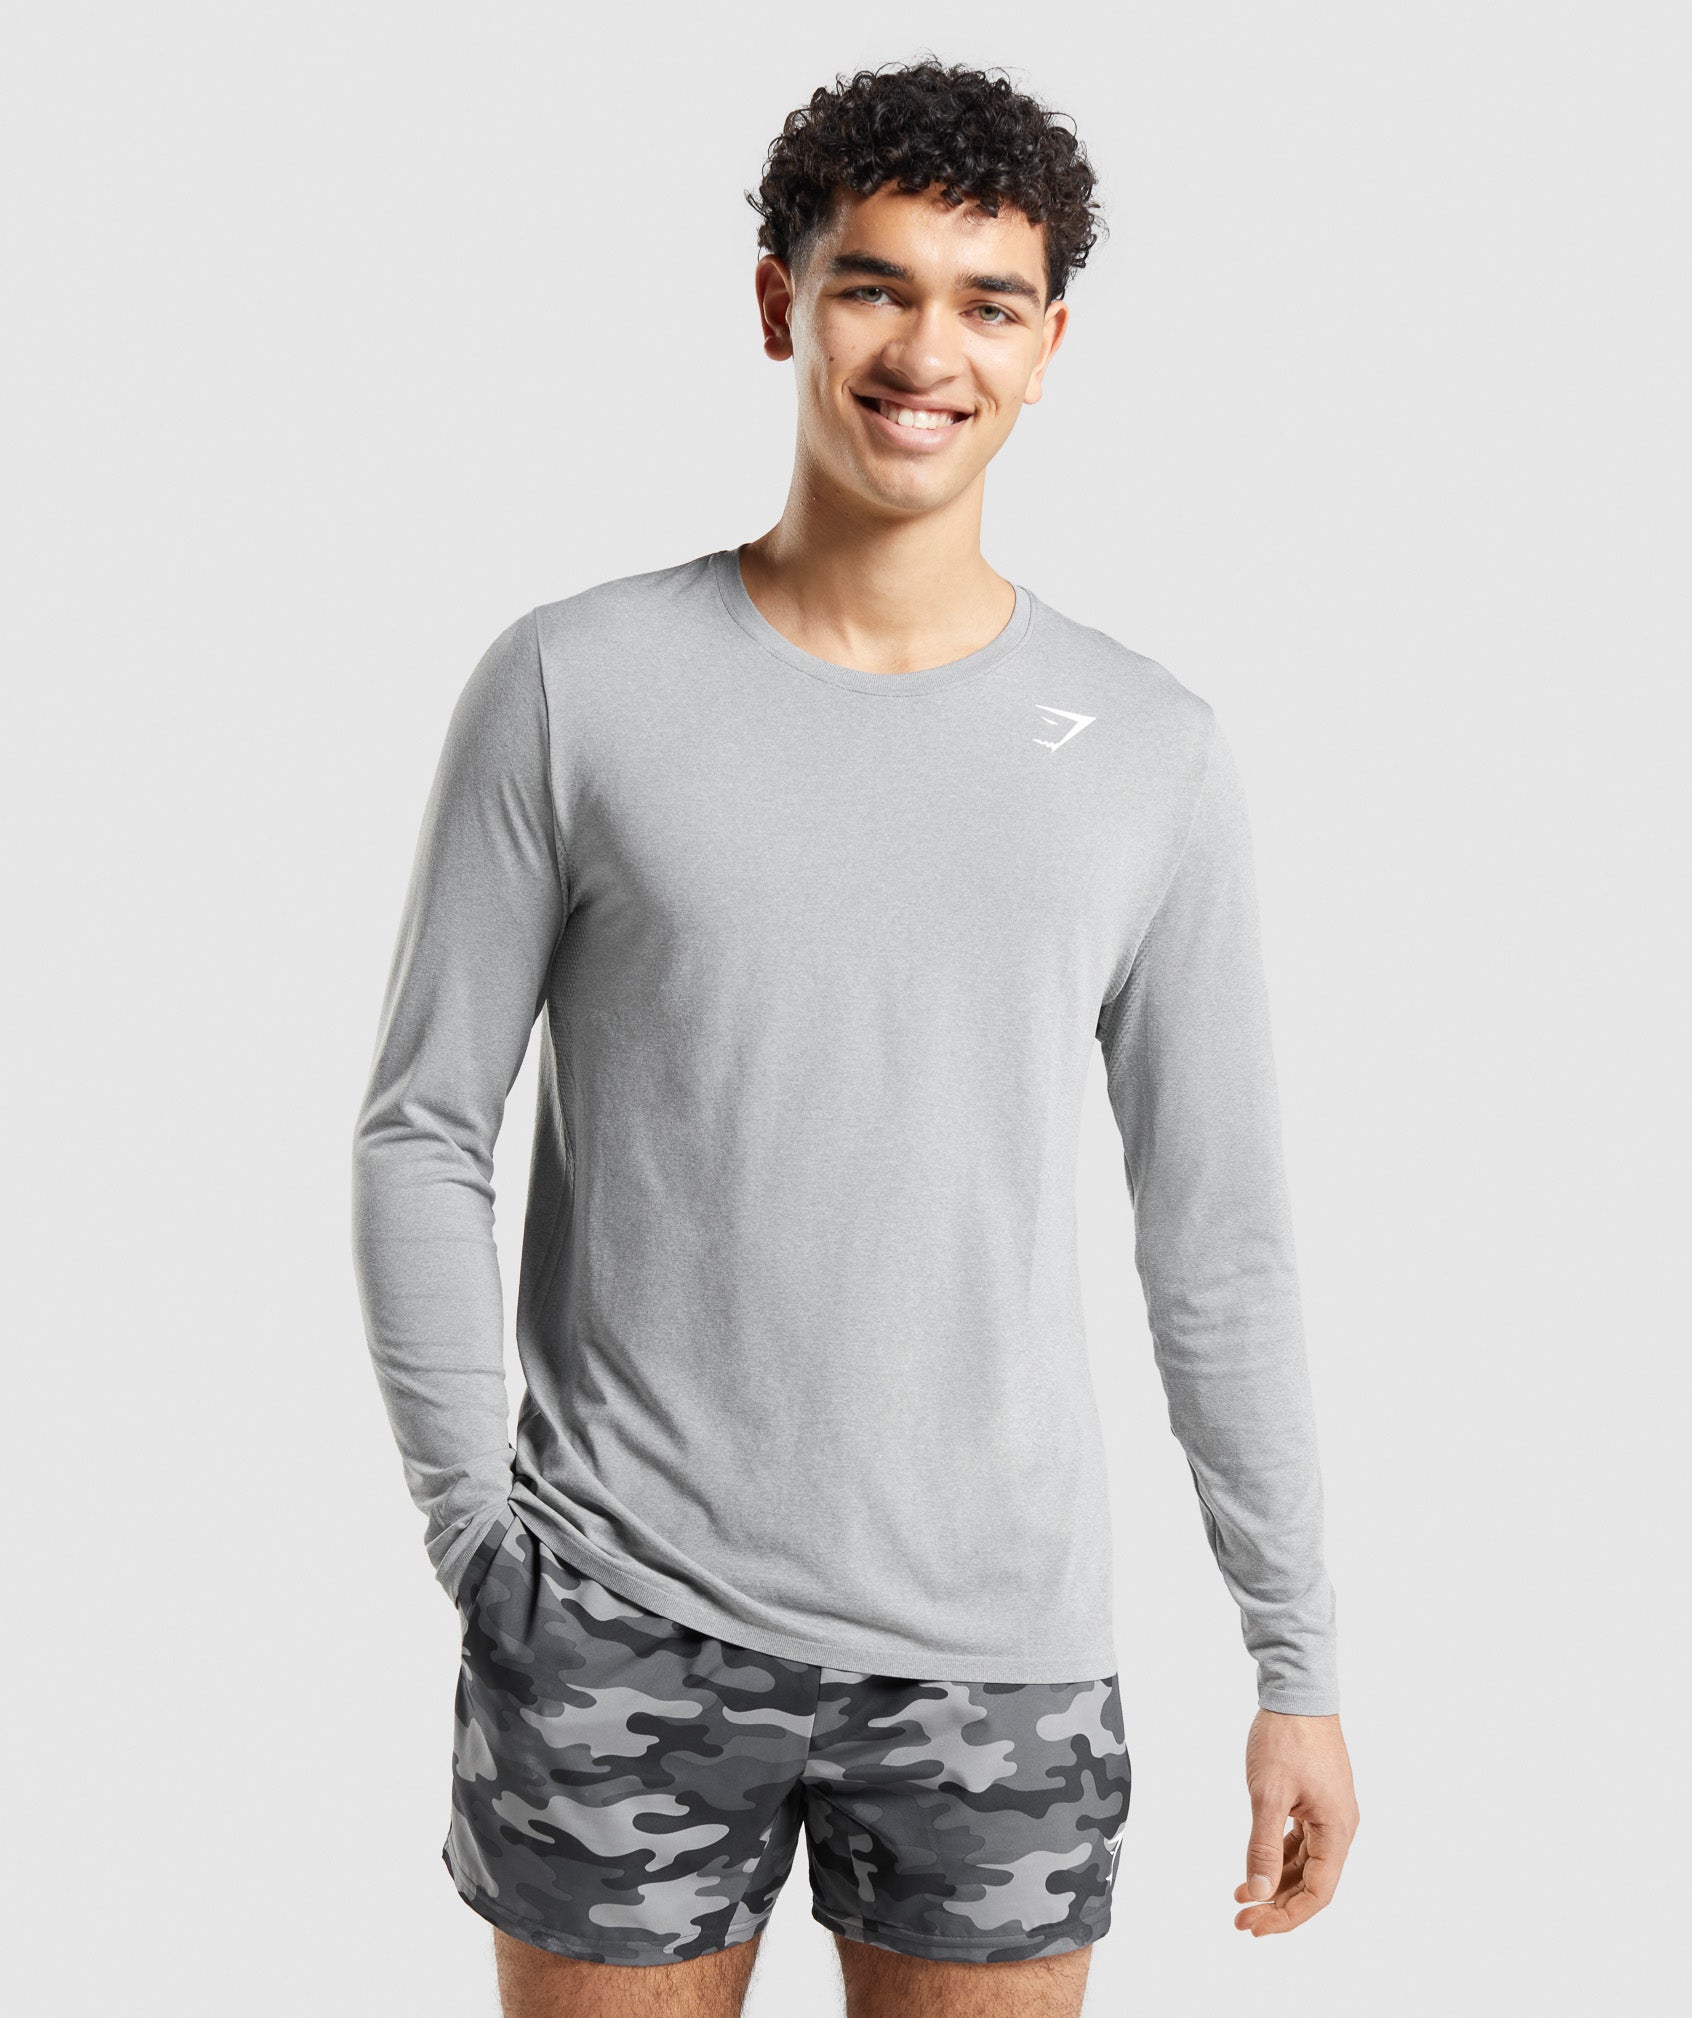 Arrival Seamless Long Sleeve T-Shirt in Grey